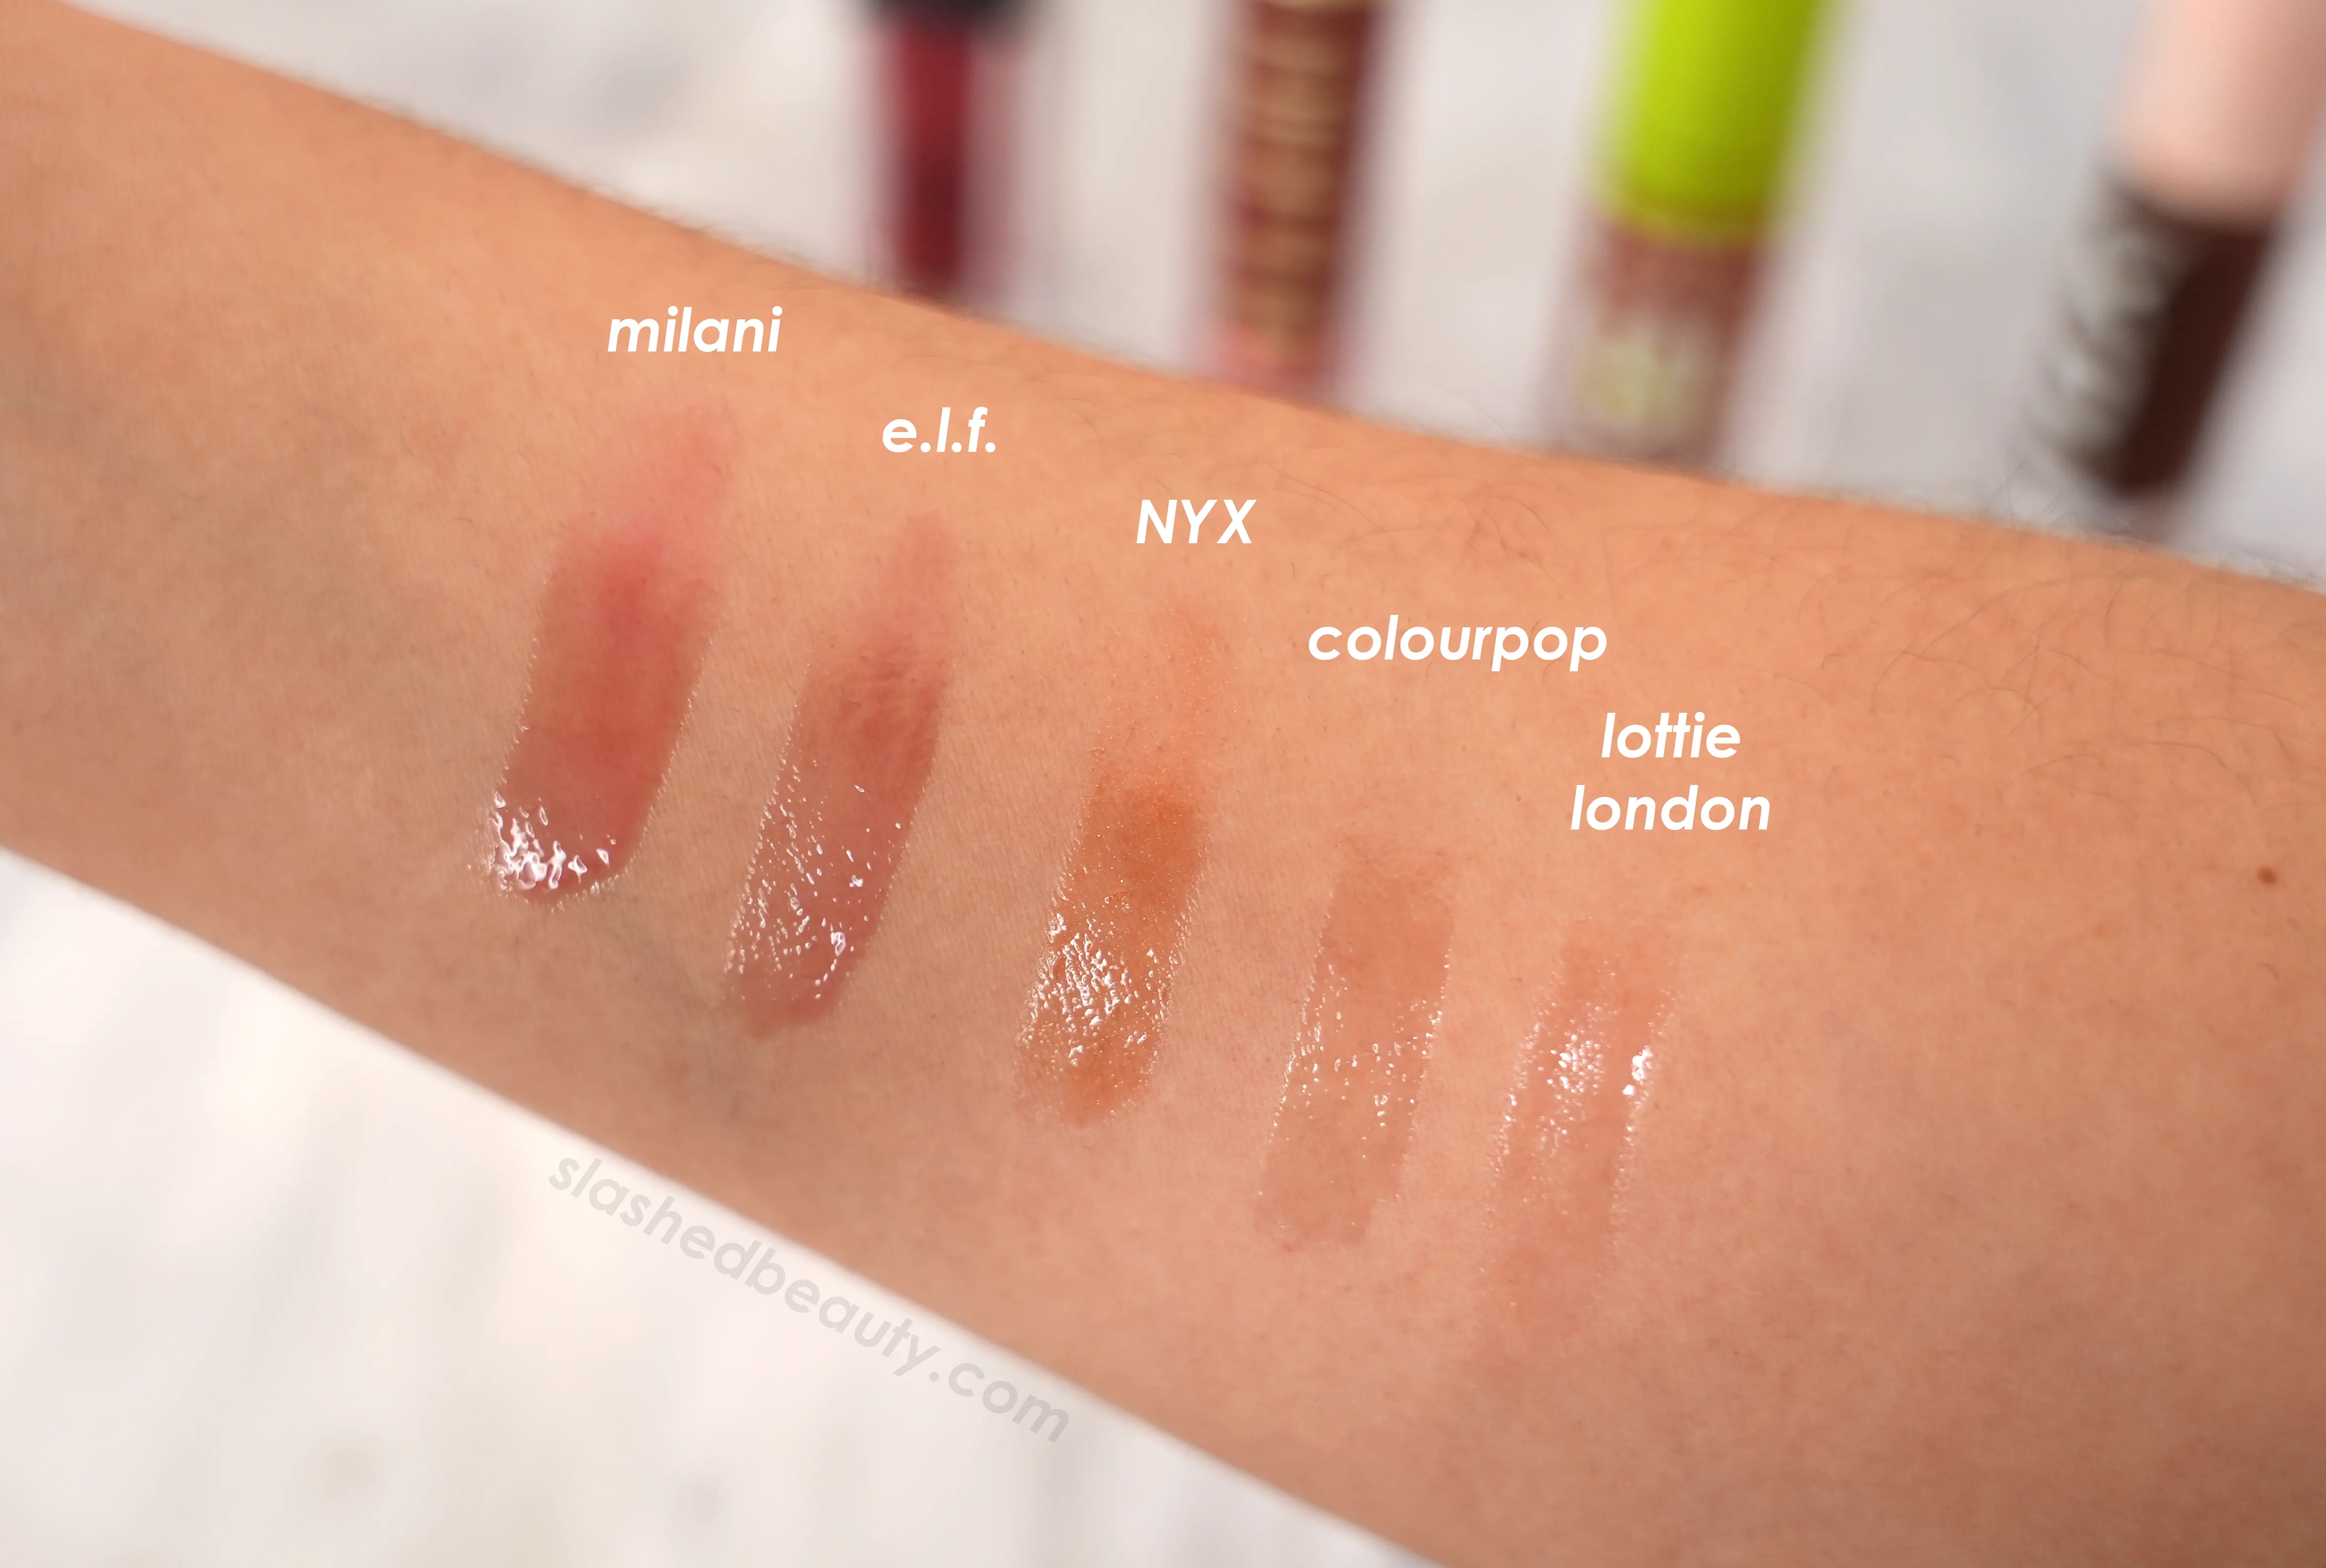 Drugstore lip oil swatches | The 5 Best Drugstore Lip Oils Tested & Compared | Slashed Beauty